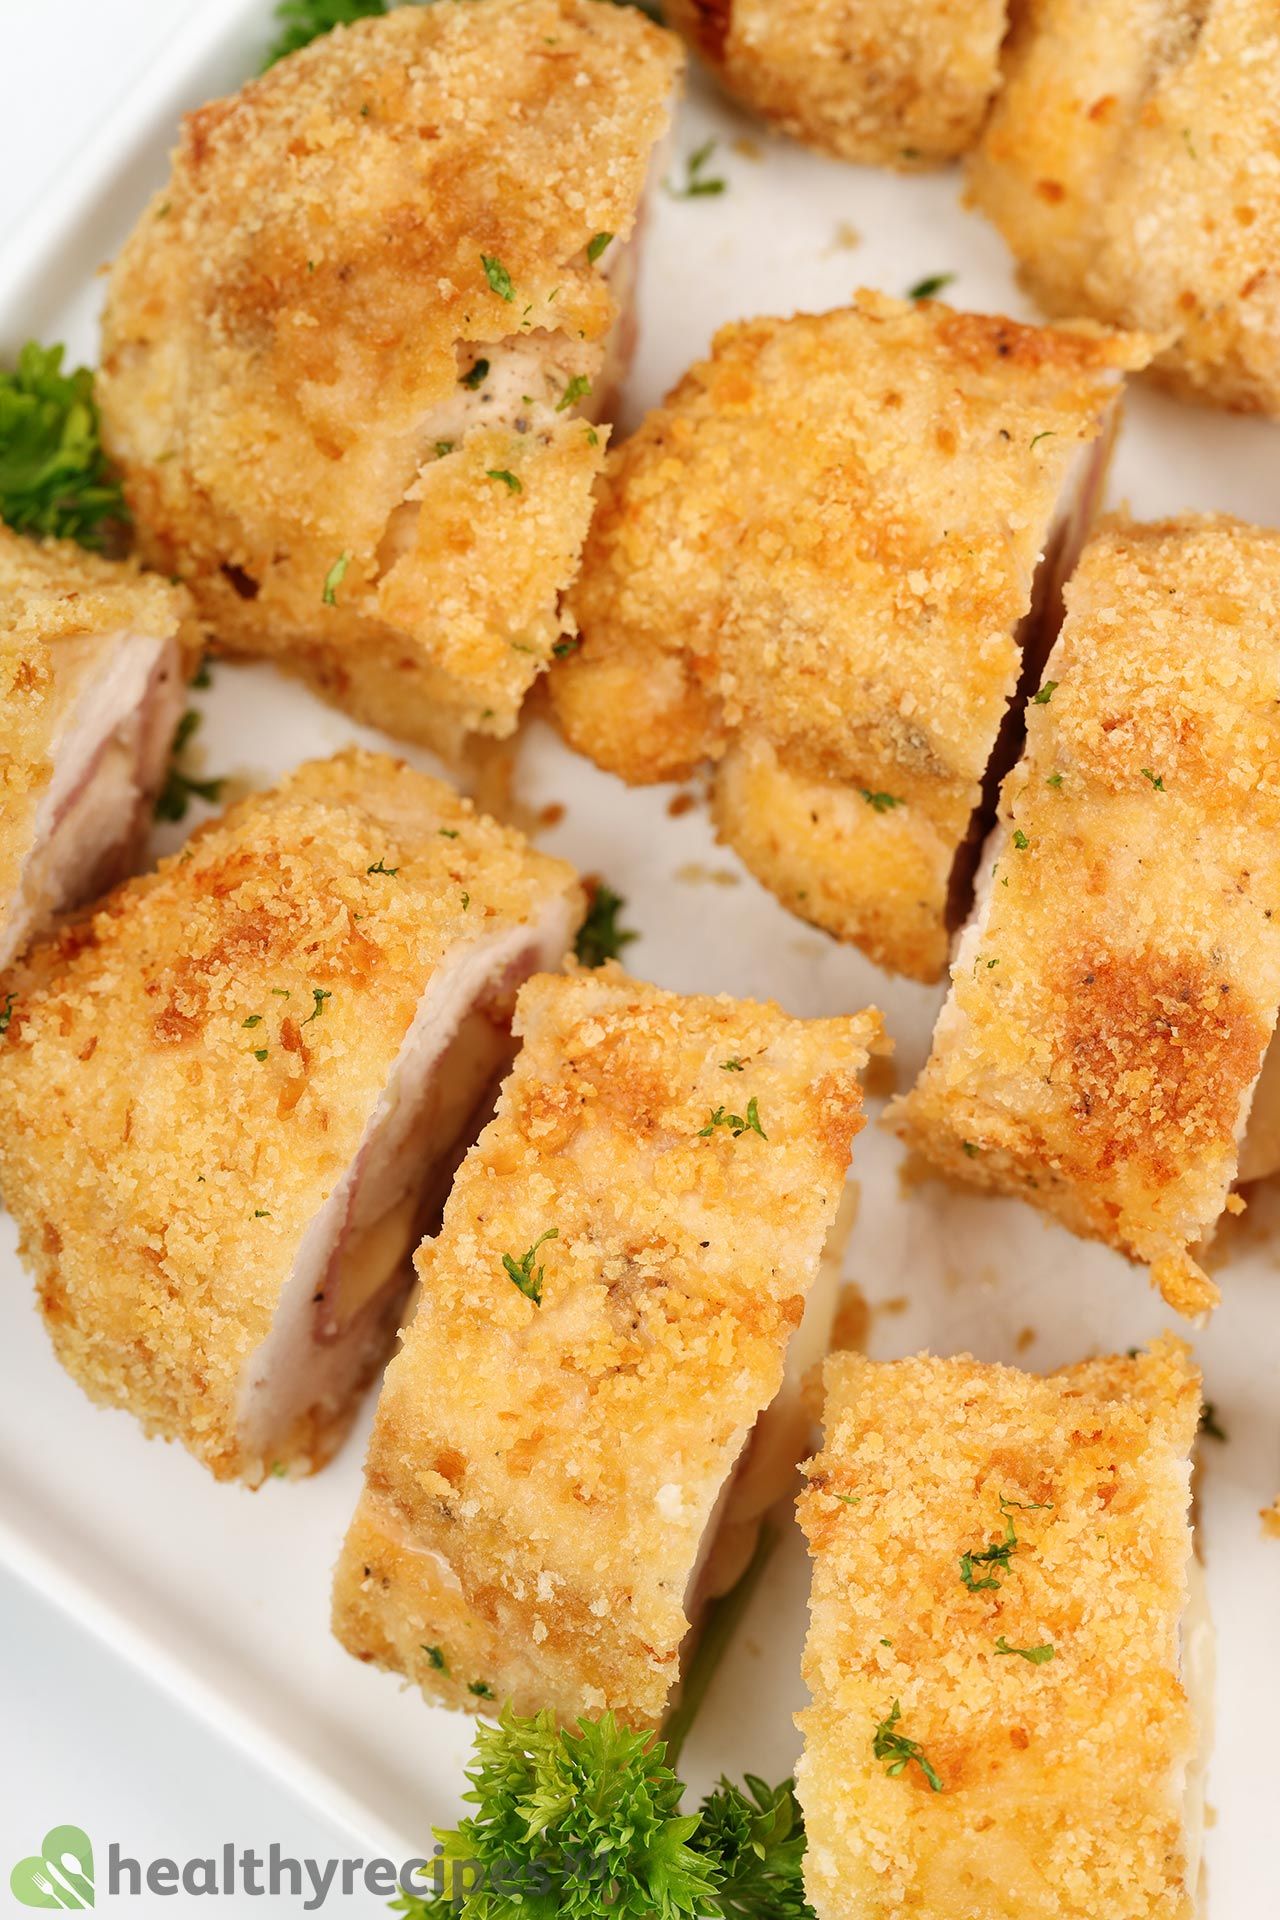 How to Store and Reheat Chicken Cordon Bleu